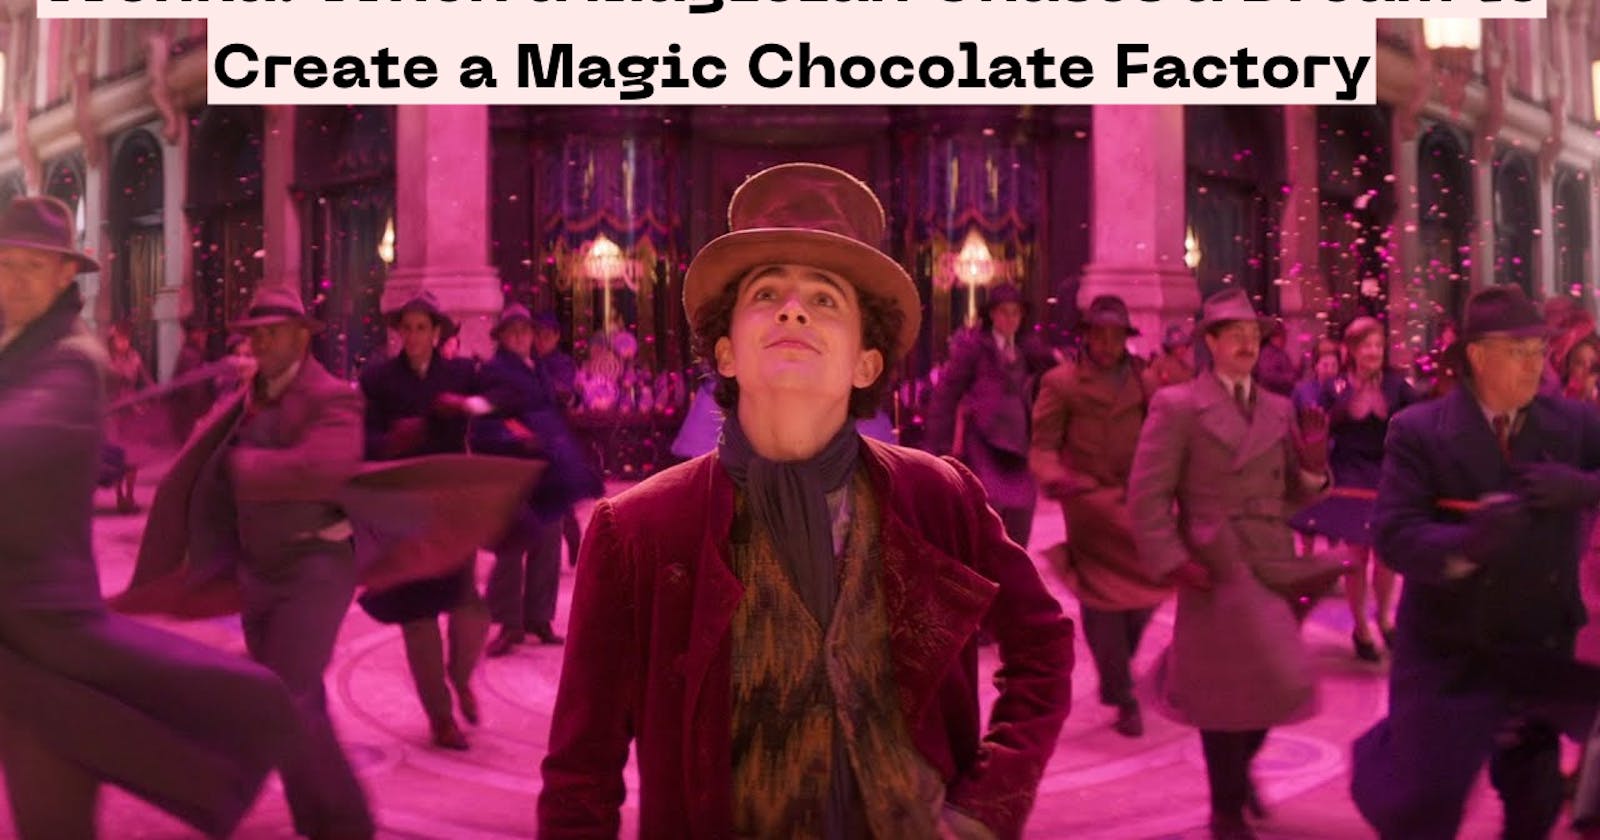 Wonka: When a Magician Chases a Dream to Create a Magic Chocolate Factory